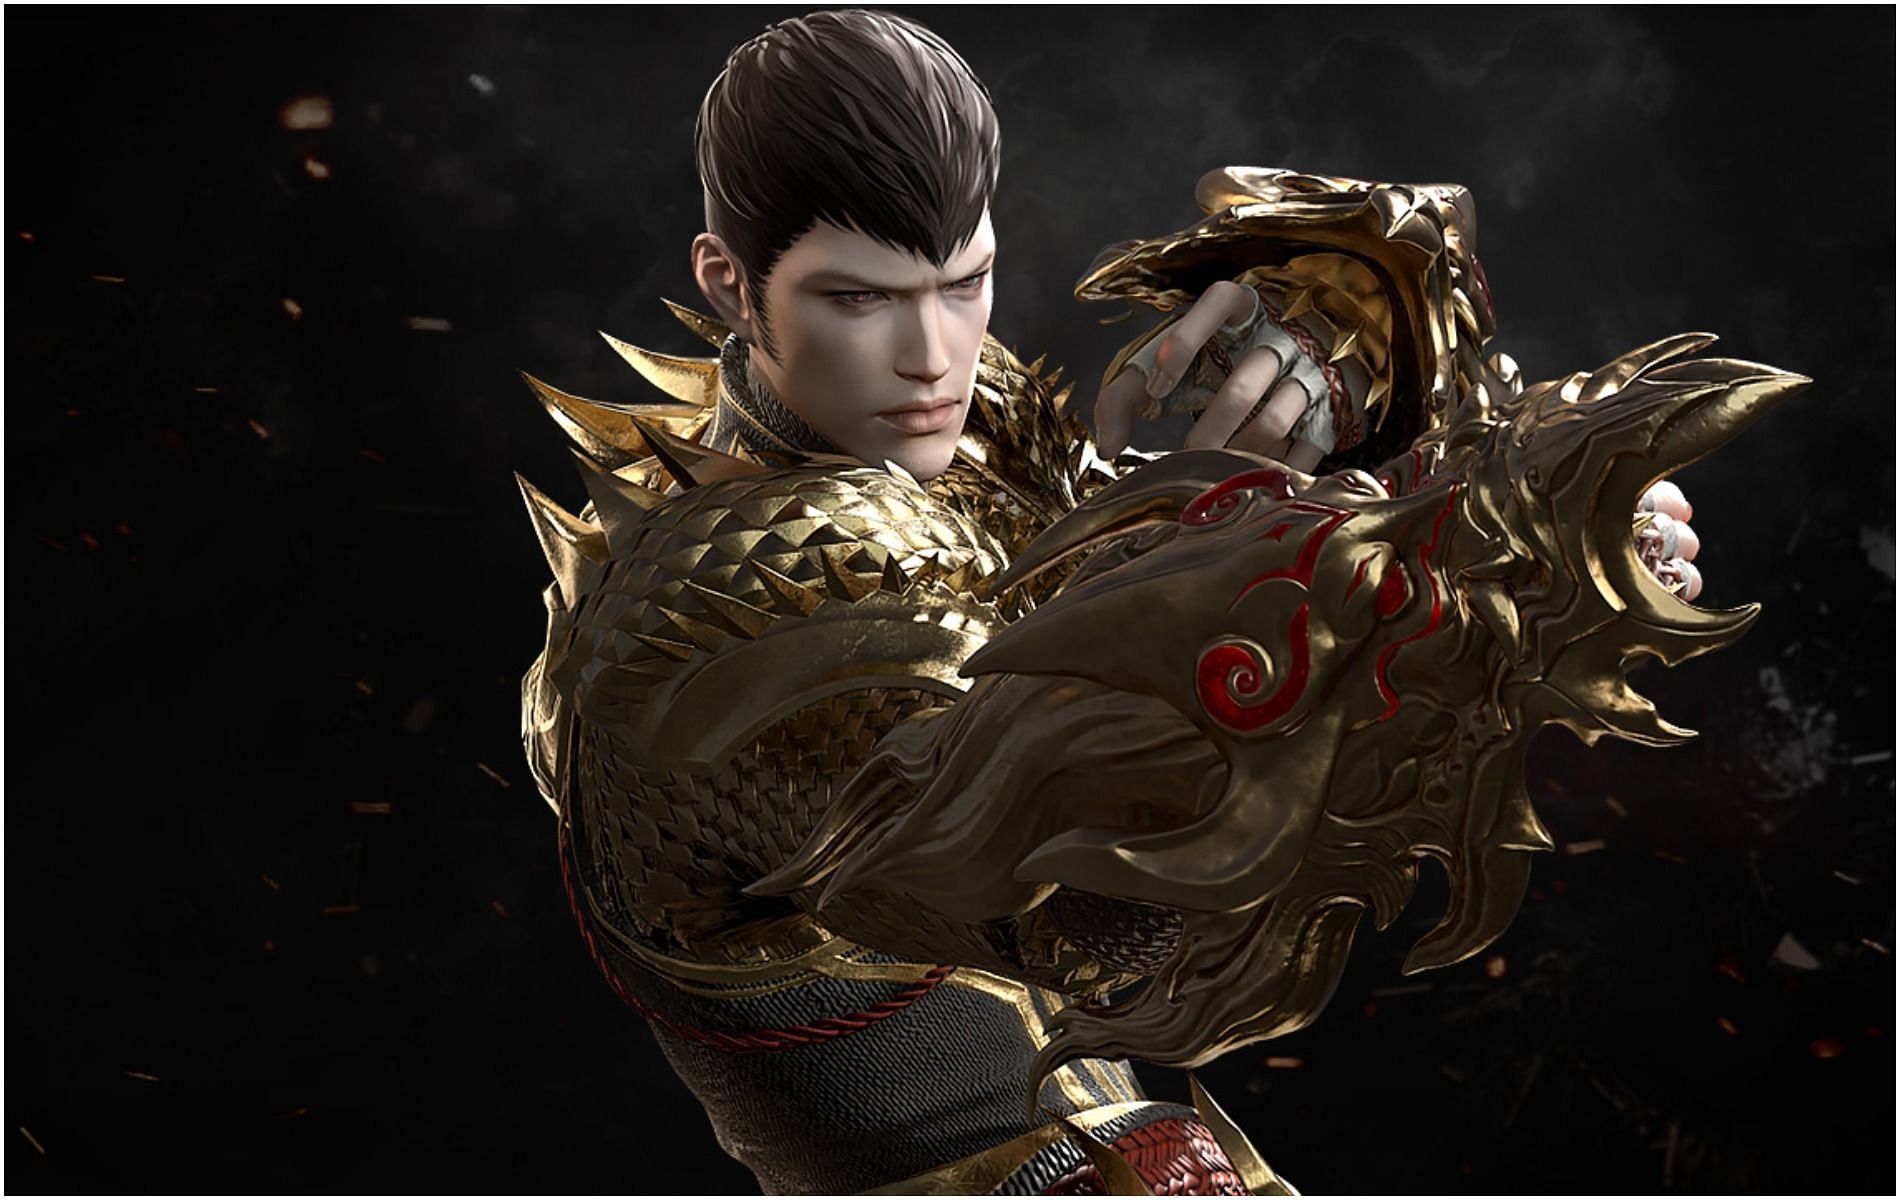 The Striker is an extremely potent martial artist sub-class (Image via Lost Ark)